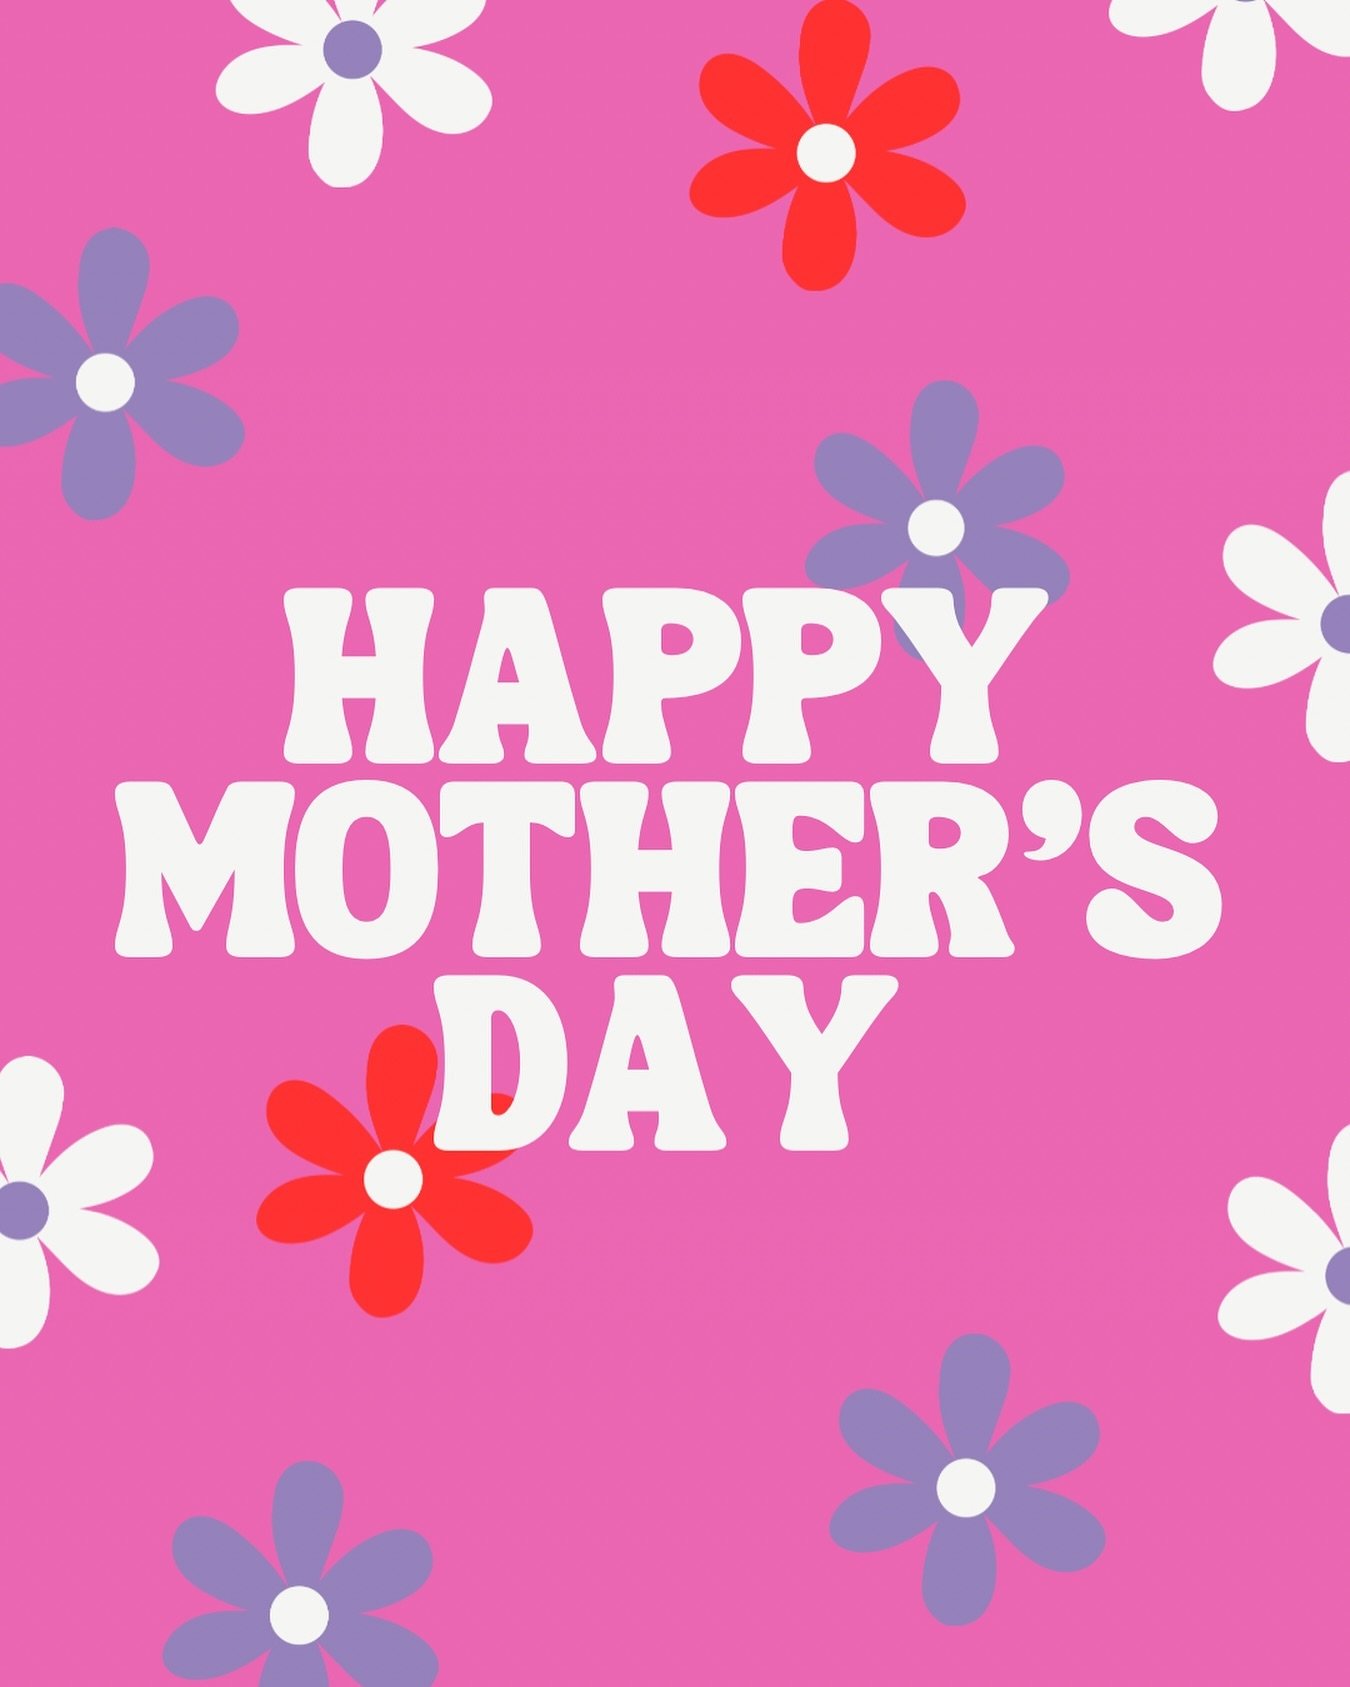 Happy Mother&rsquo;s Day to all our Moms! You make the world go round 💕 today is your day - you deserve it! #mommish